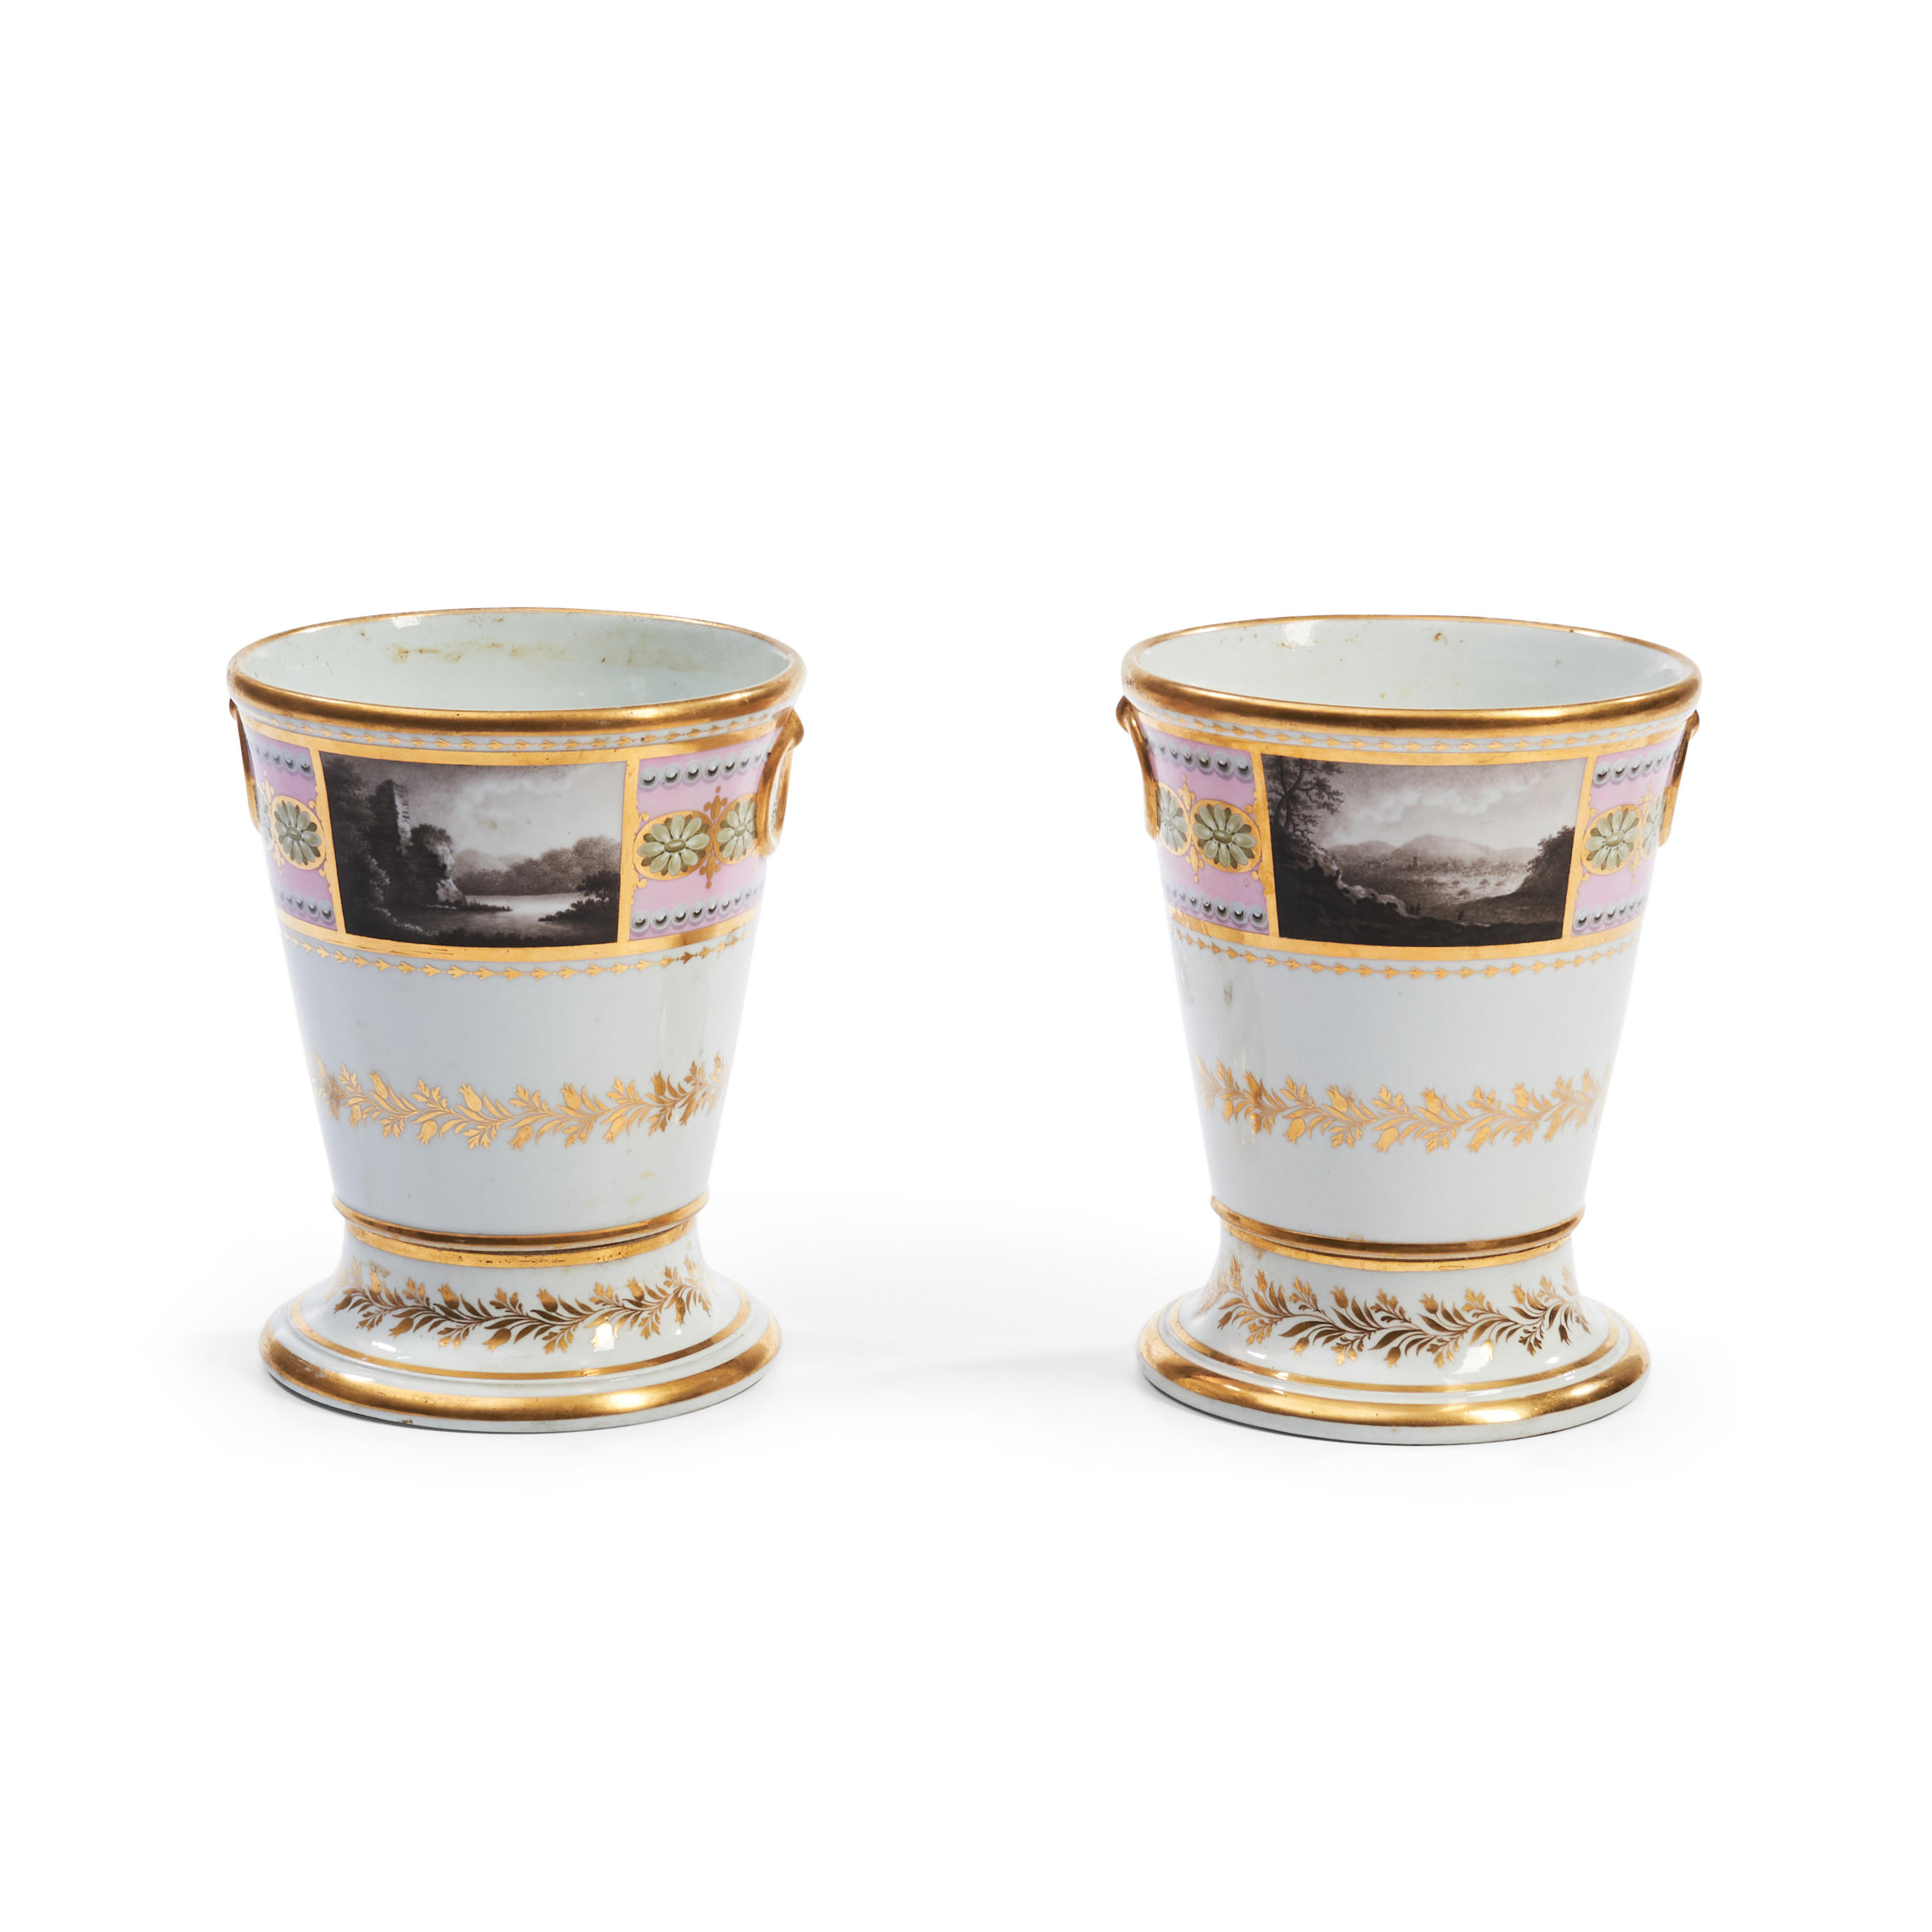 PAIR OF WORCESTER PORCELAIN PLANTERS 3ae8bb